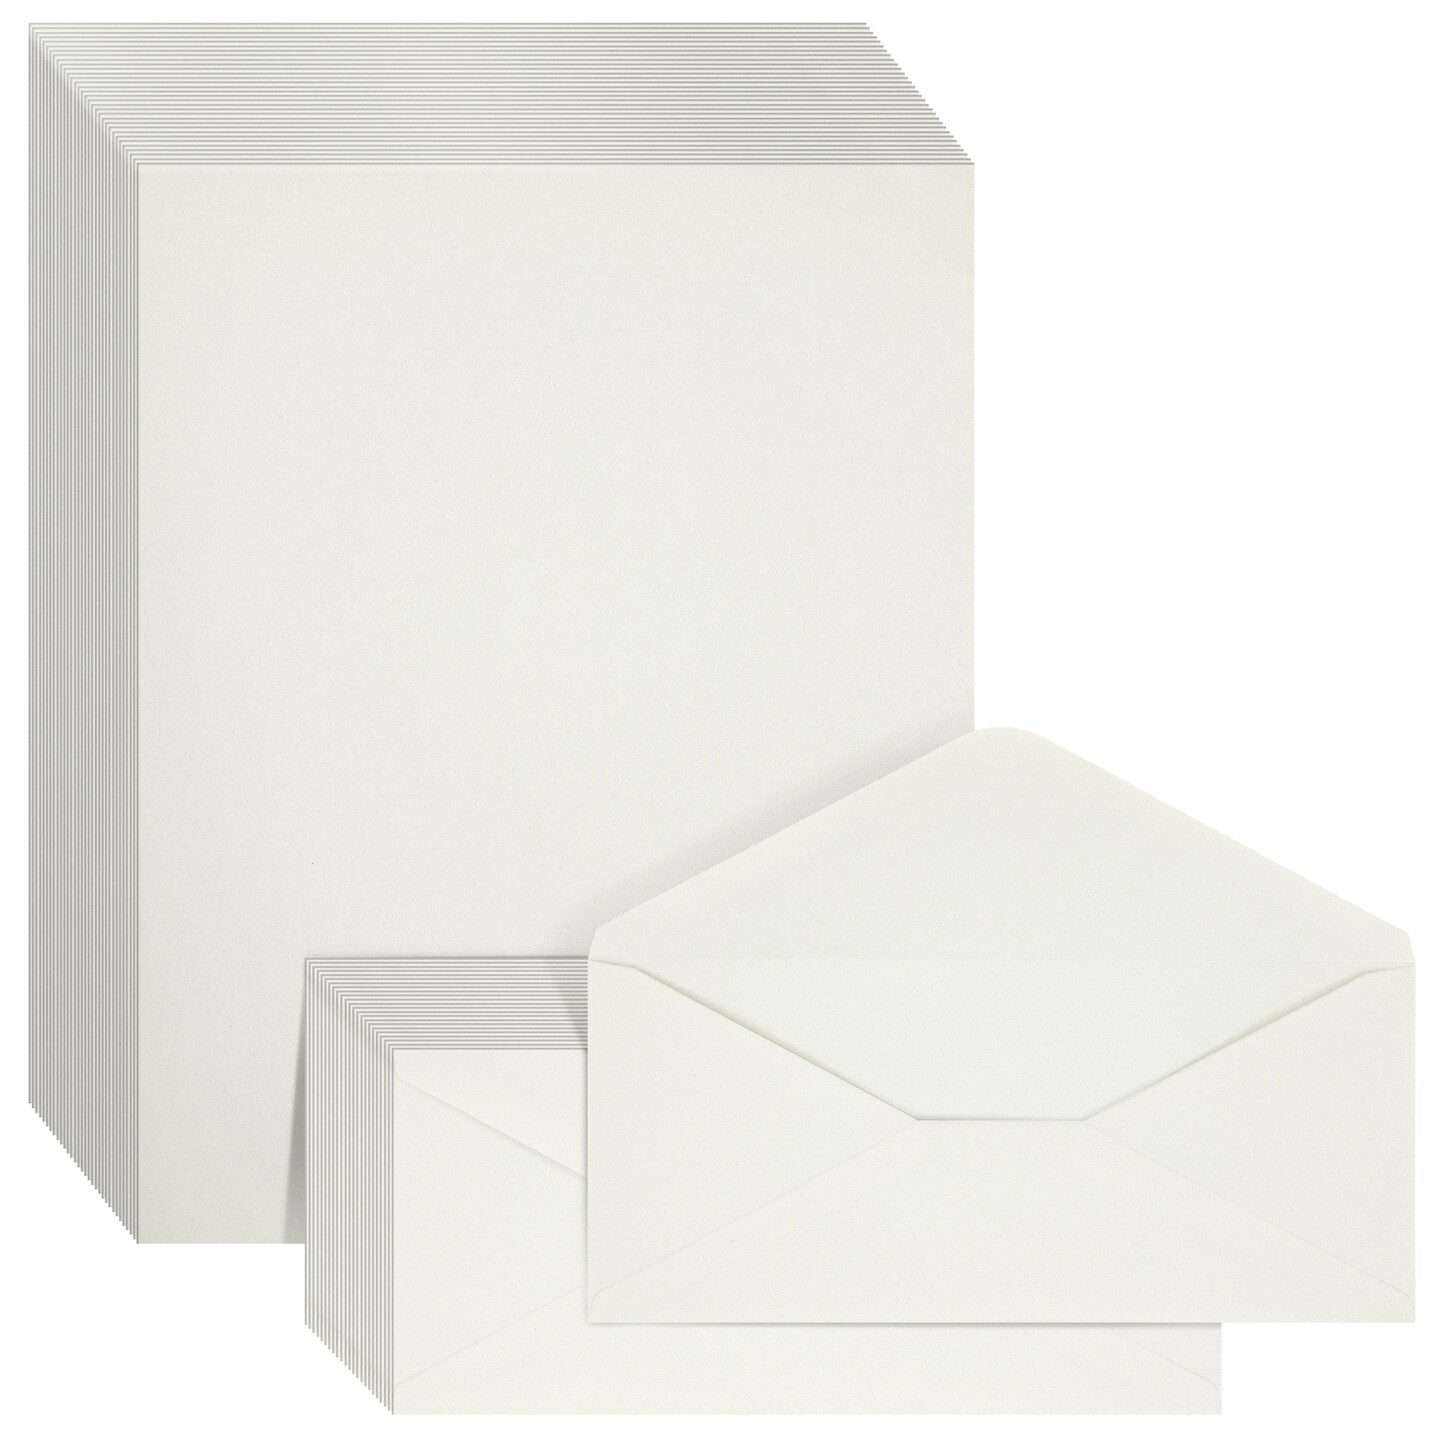 100 Piece Cotton Stationery Paper and Envelopes Set for Writing Letters,  Wedding Invitations, Ivory (8.5 x 11 In)